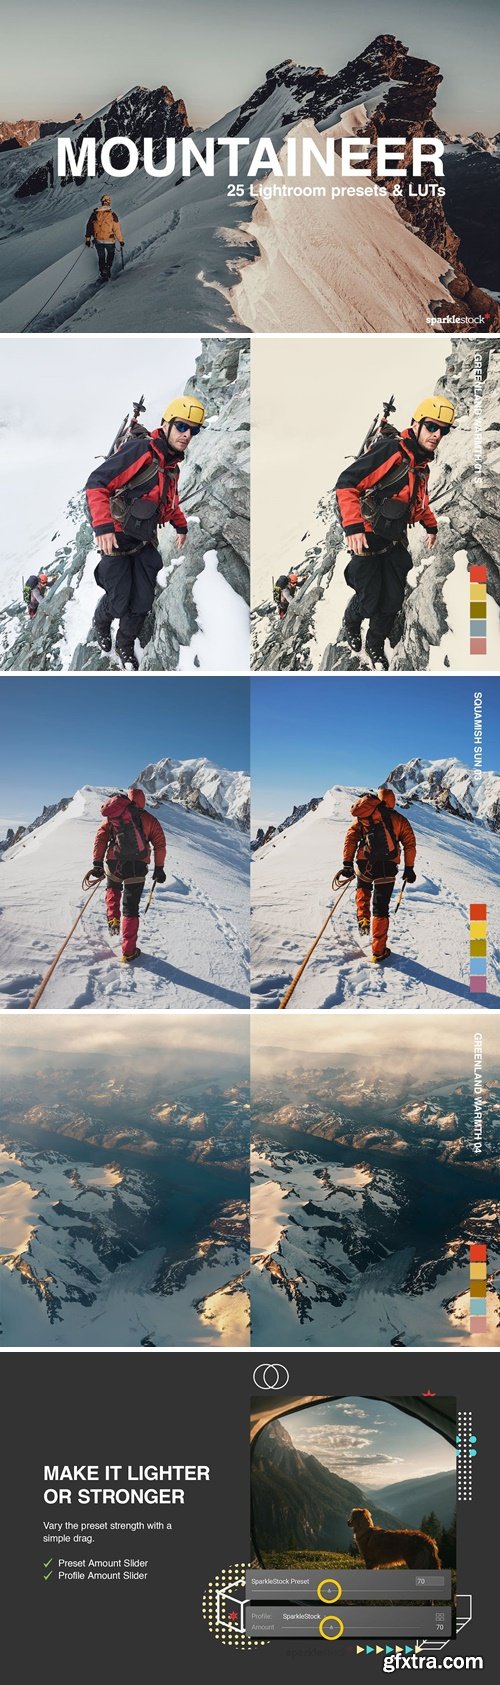 25 Mountaineer Lightroom Presets and LUTs TPHHS76